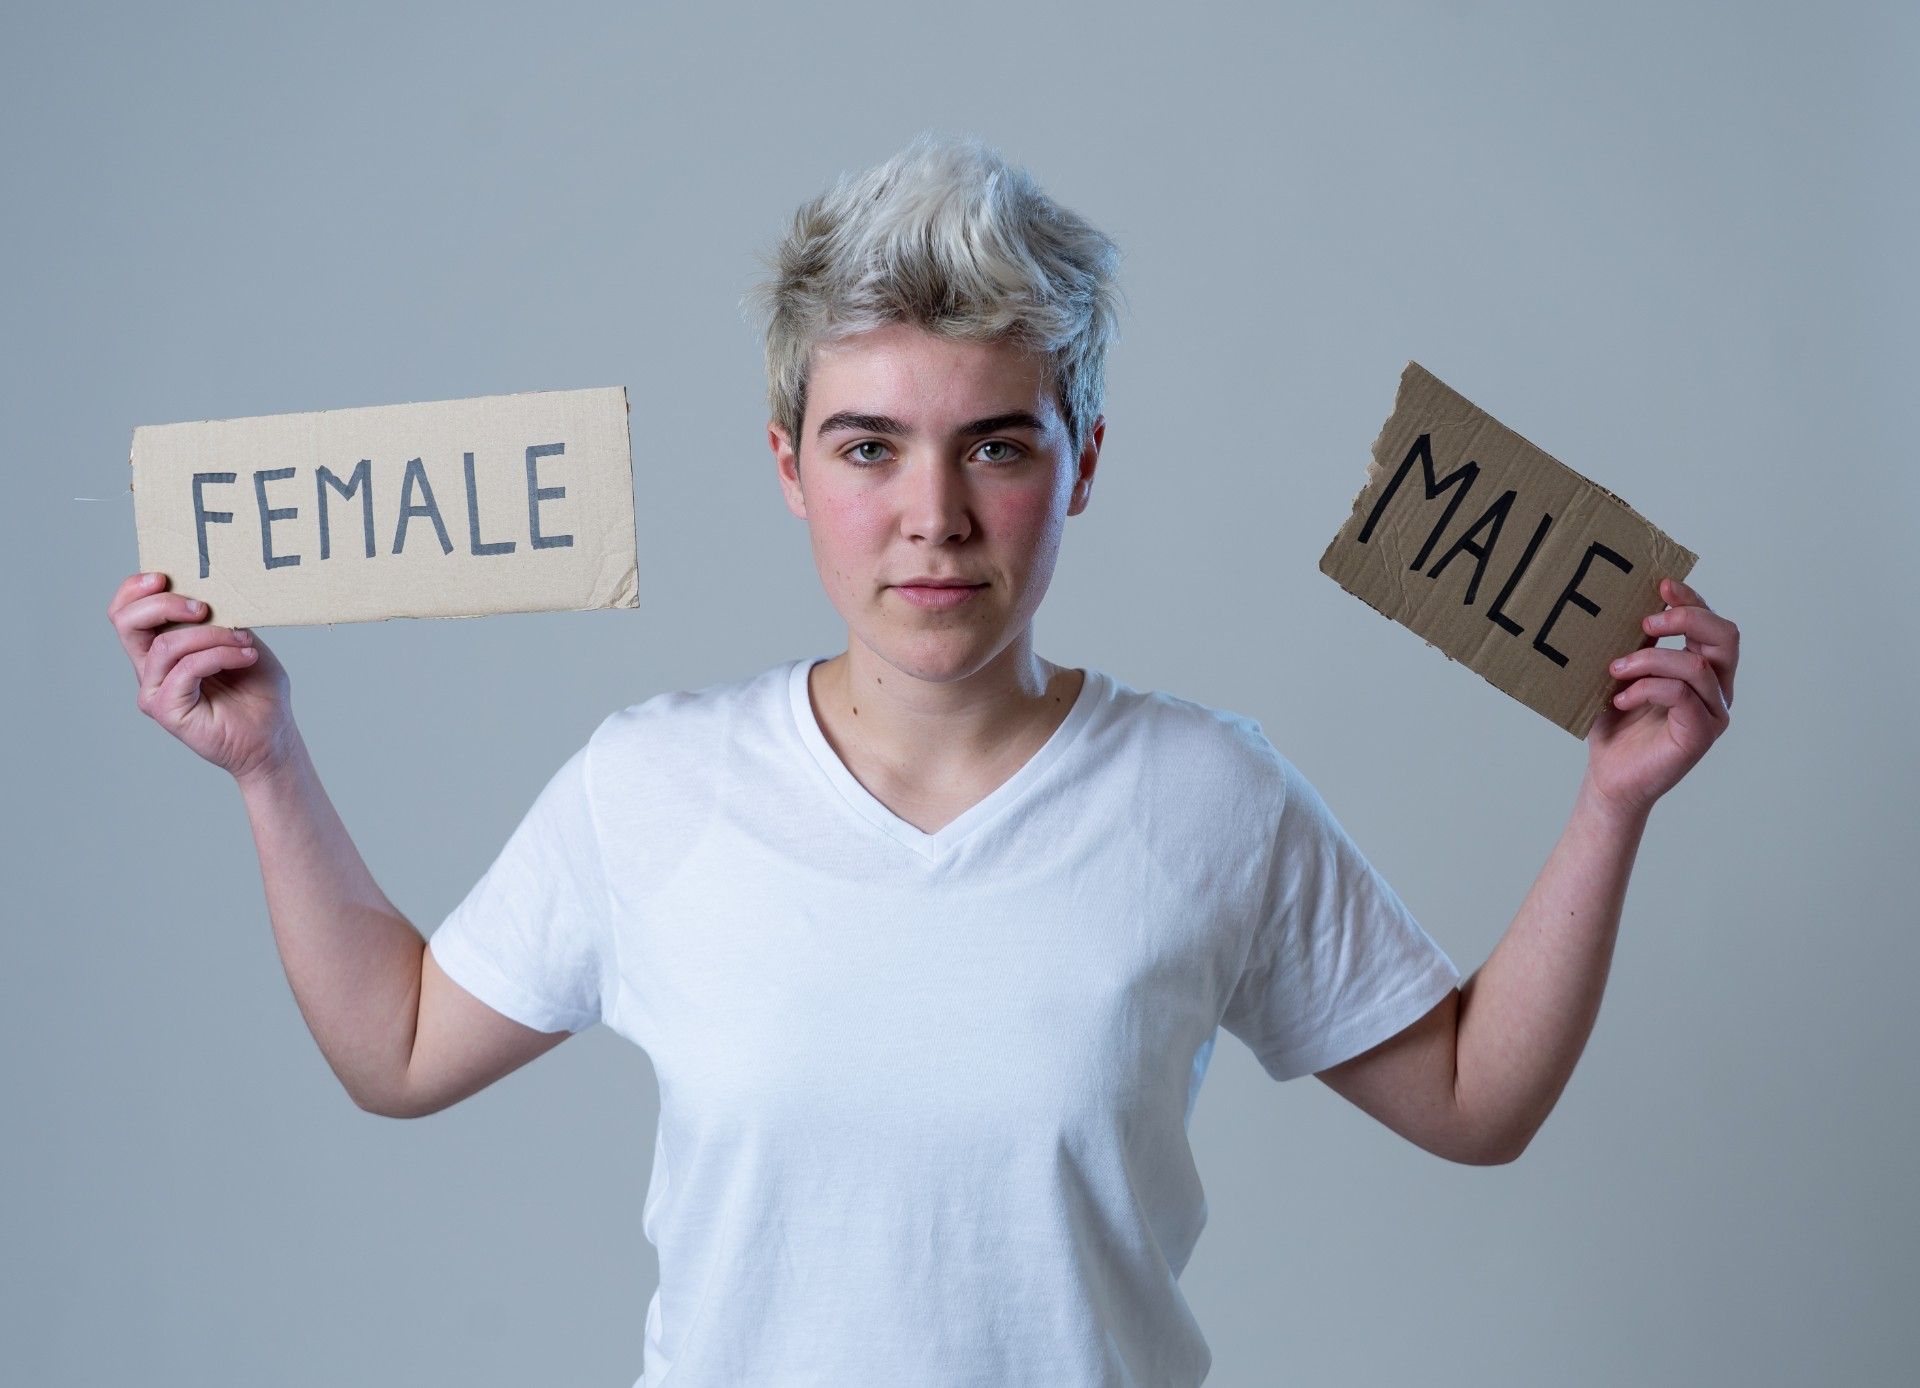 Transgender teen in white t-shirt holds up words "female" and "male" written on cardboard